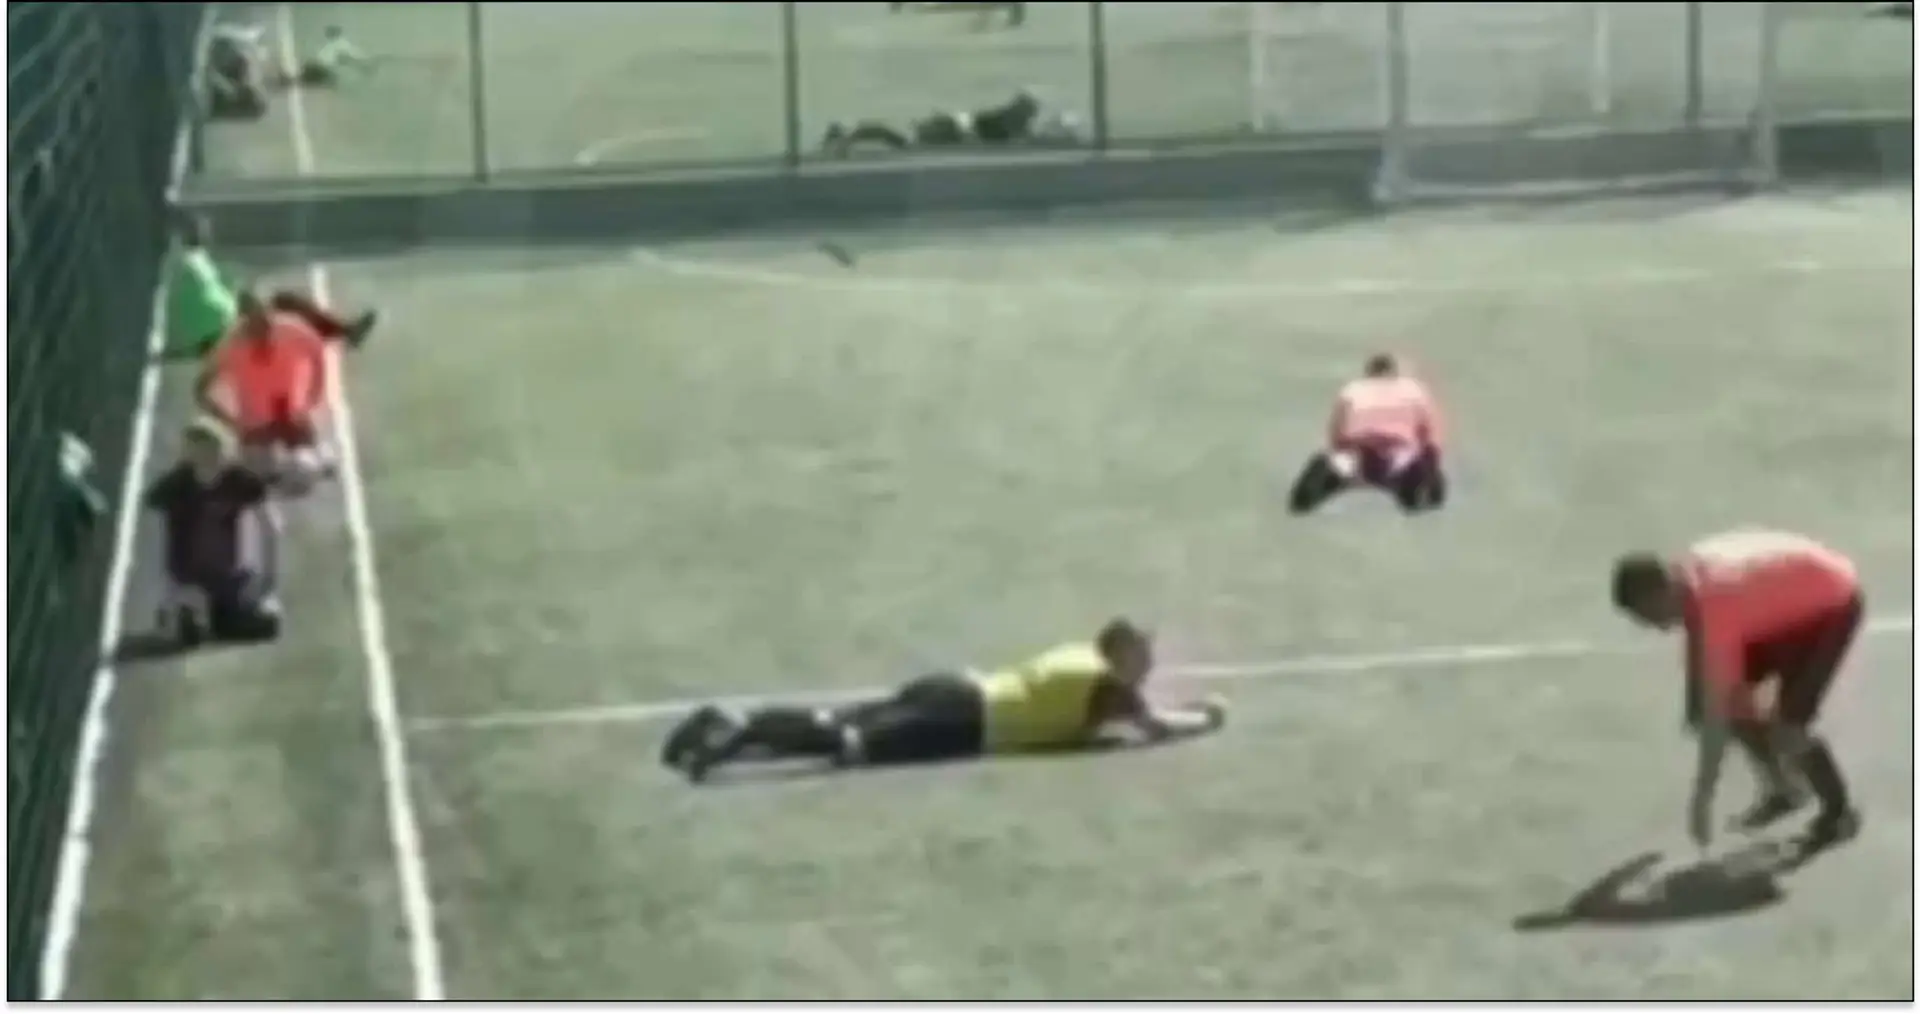 Ukraine Sunday League game interrupted by Russian airstrike